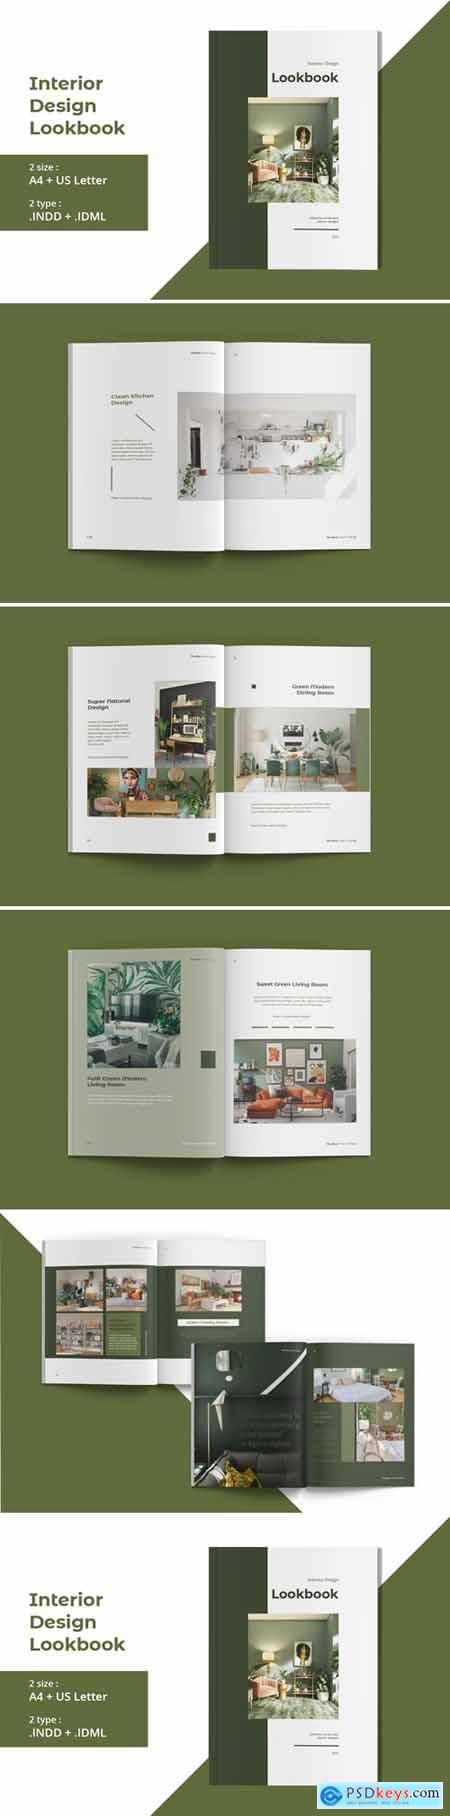 Furniture and Household Lookbook Gallery Booklet